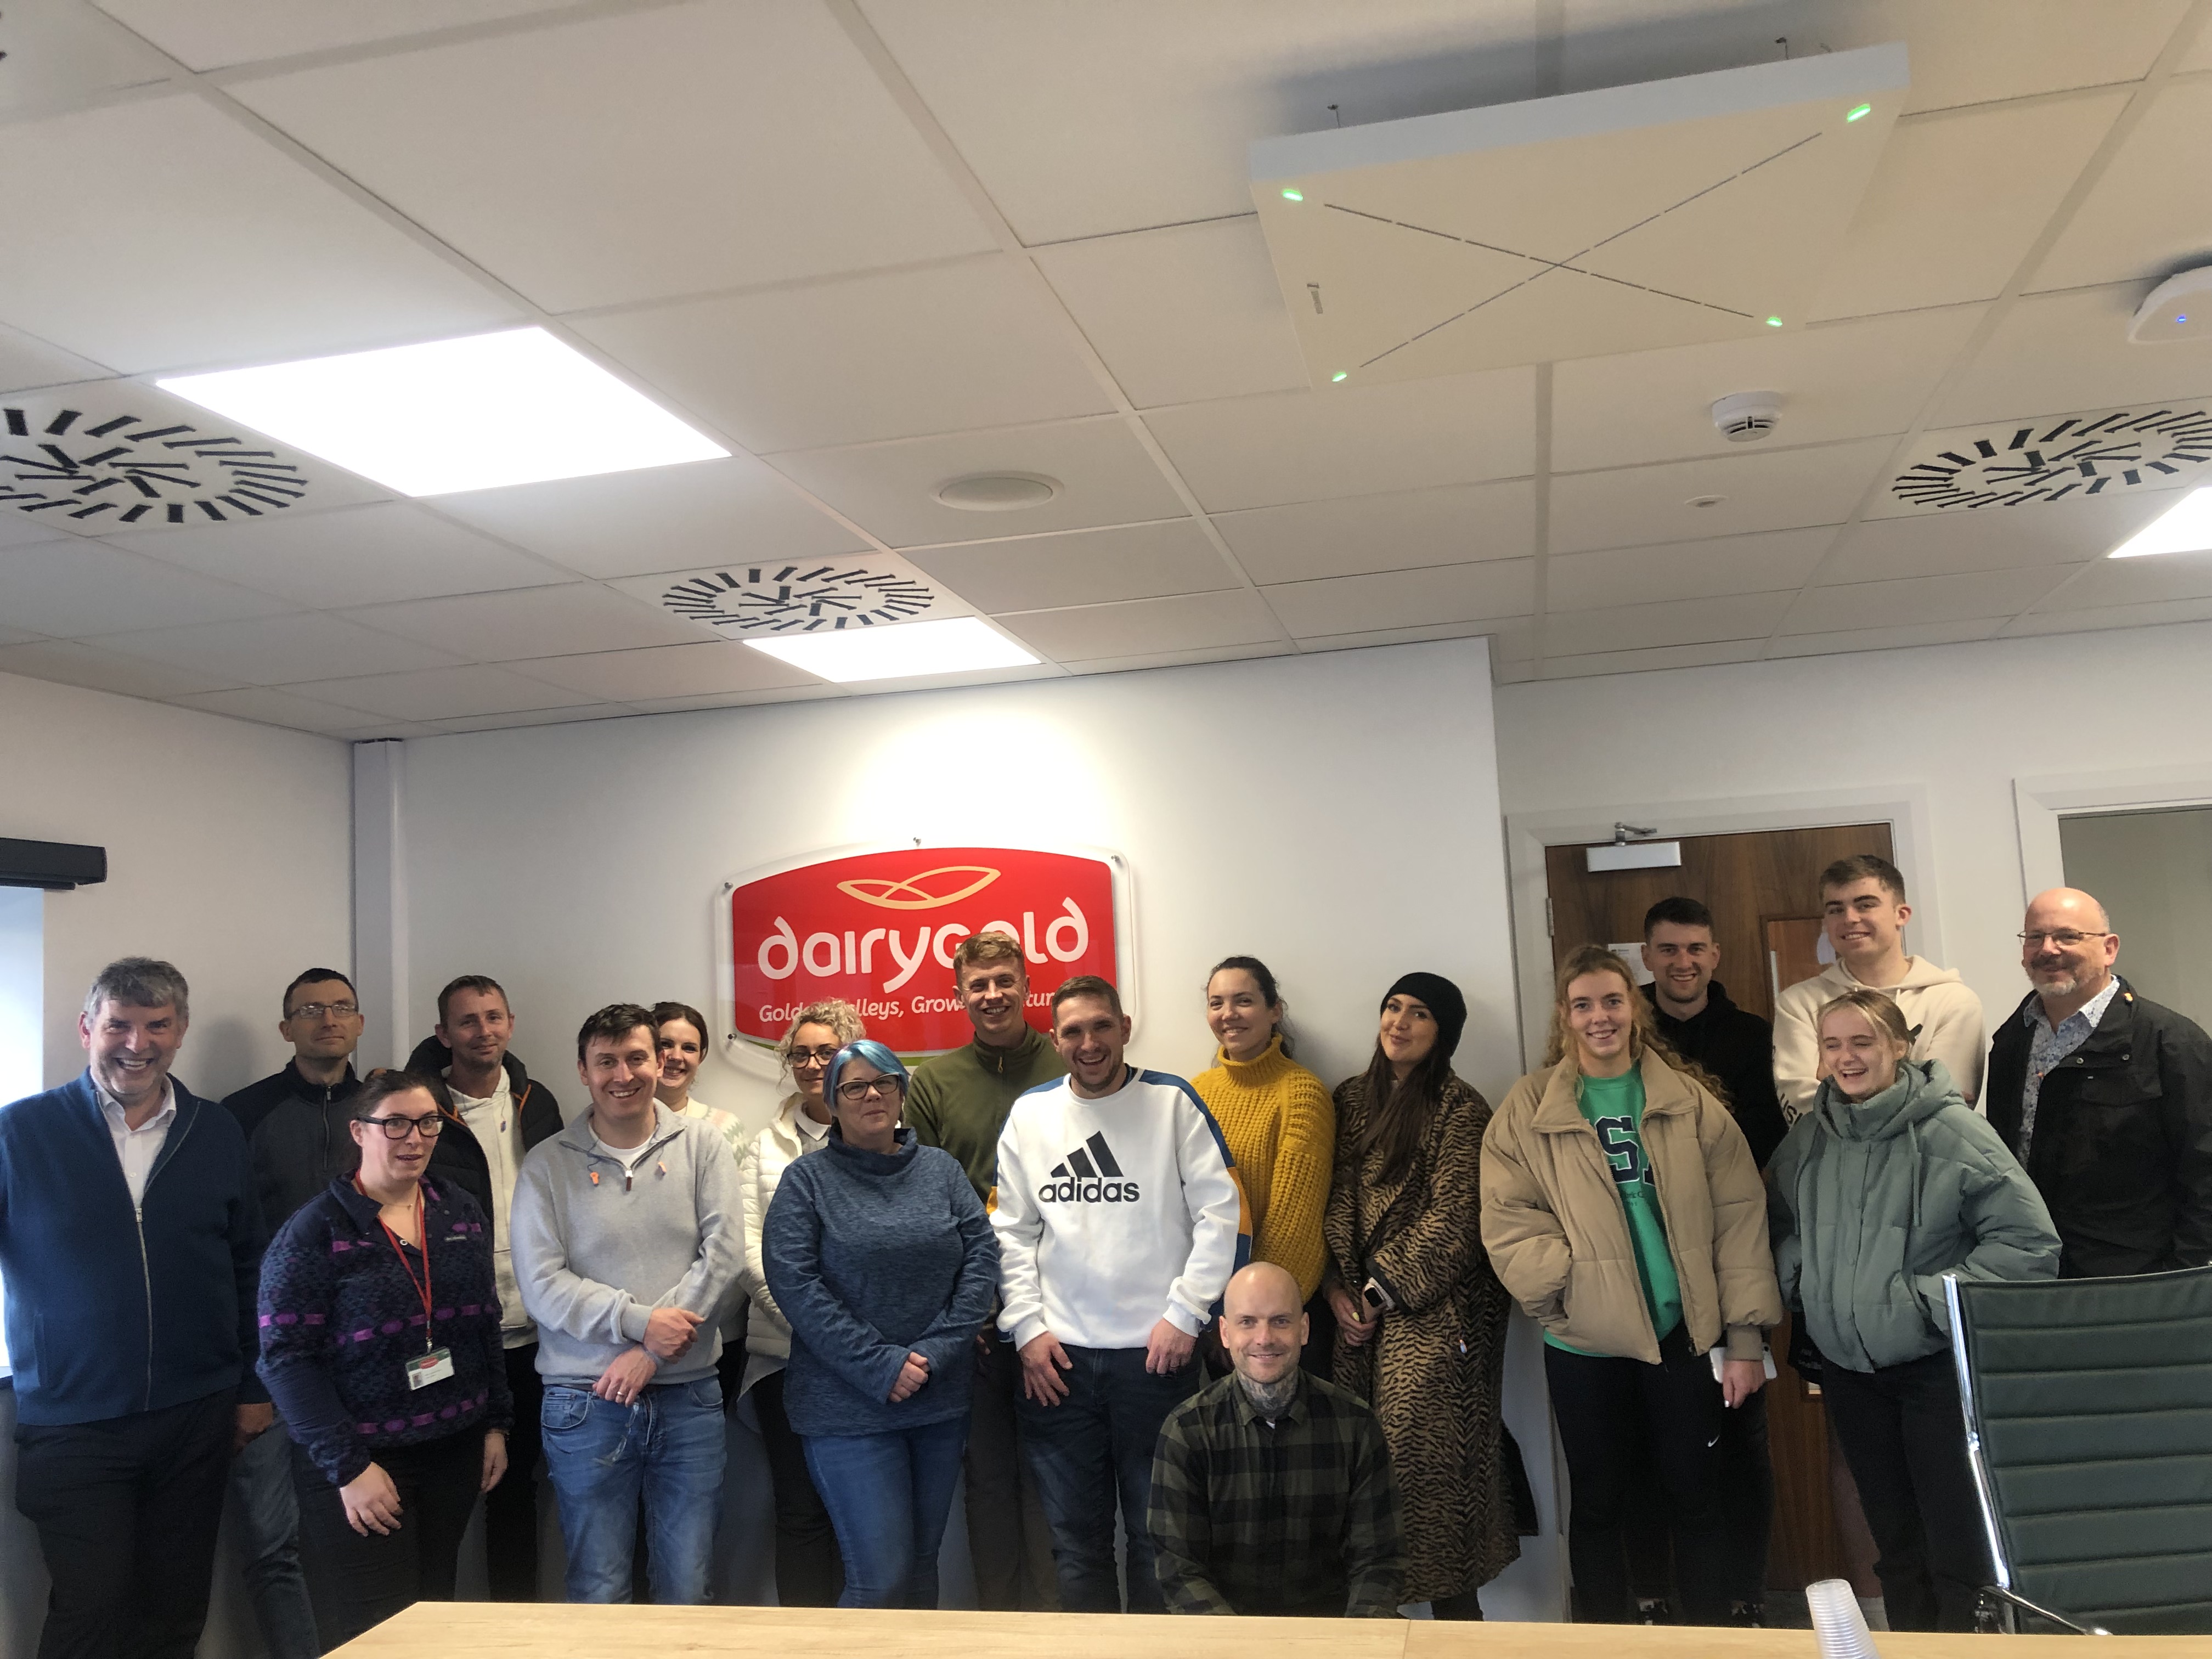 Diploma in Food Manufacturing Management class visit Dairygold Castlefarm